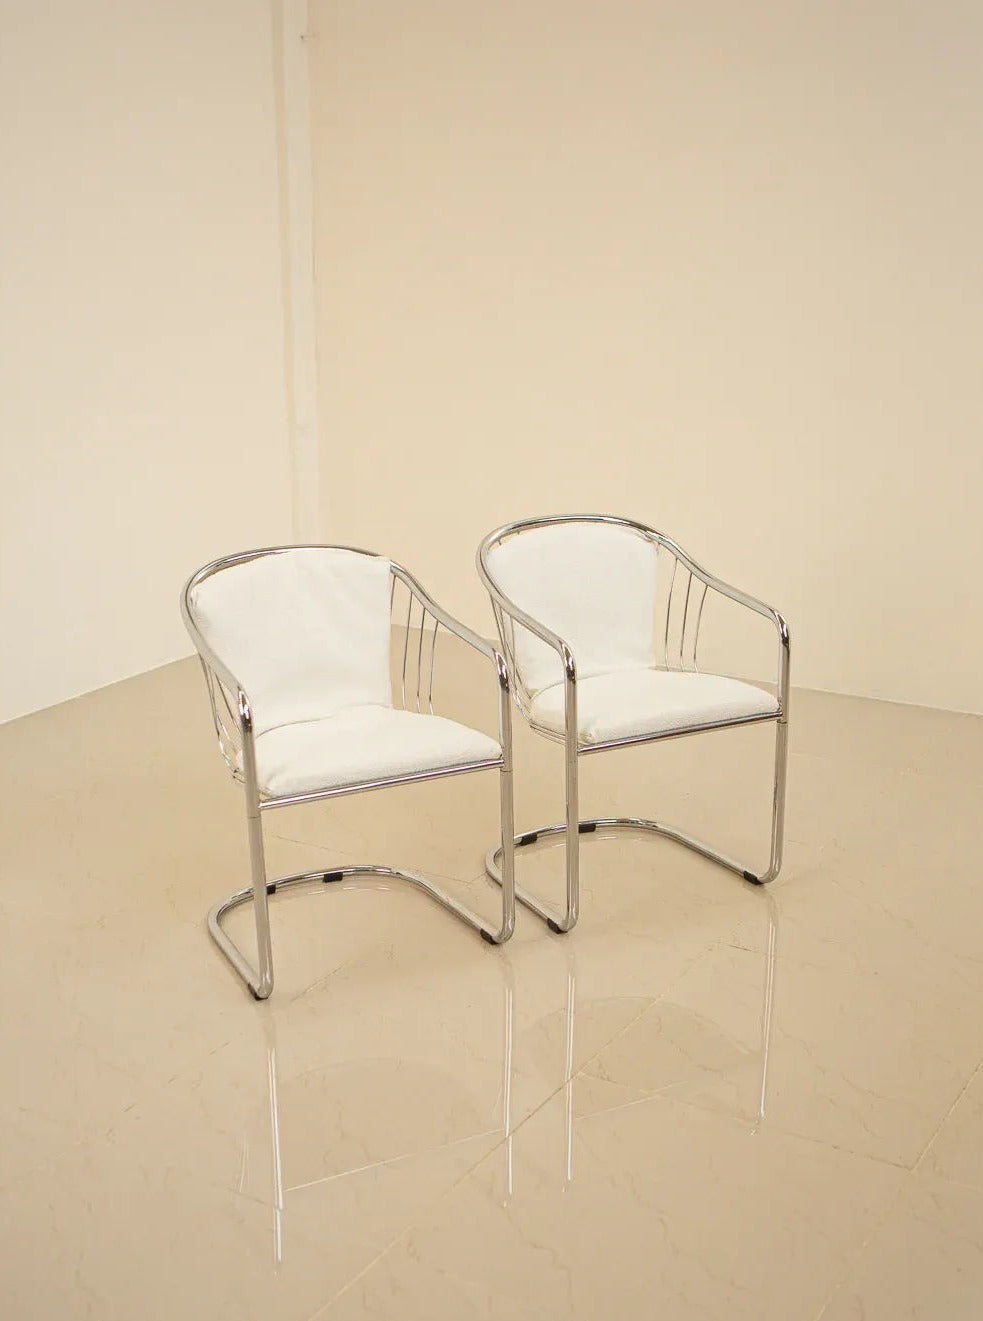 Pair of Chairs by Gastone Rinaldi 70's/80's